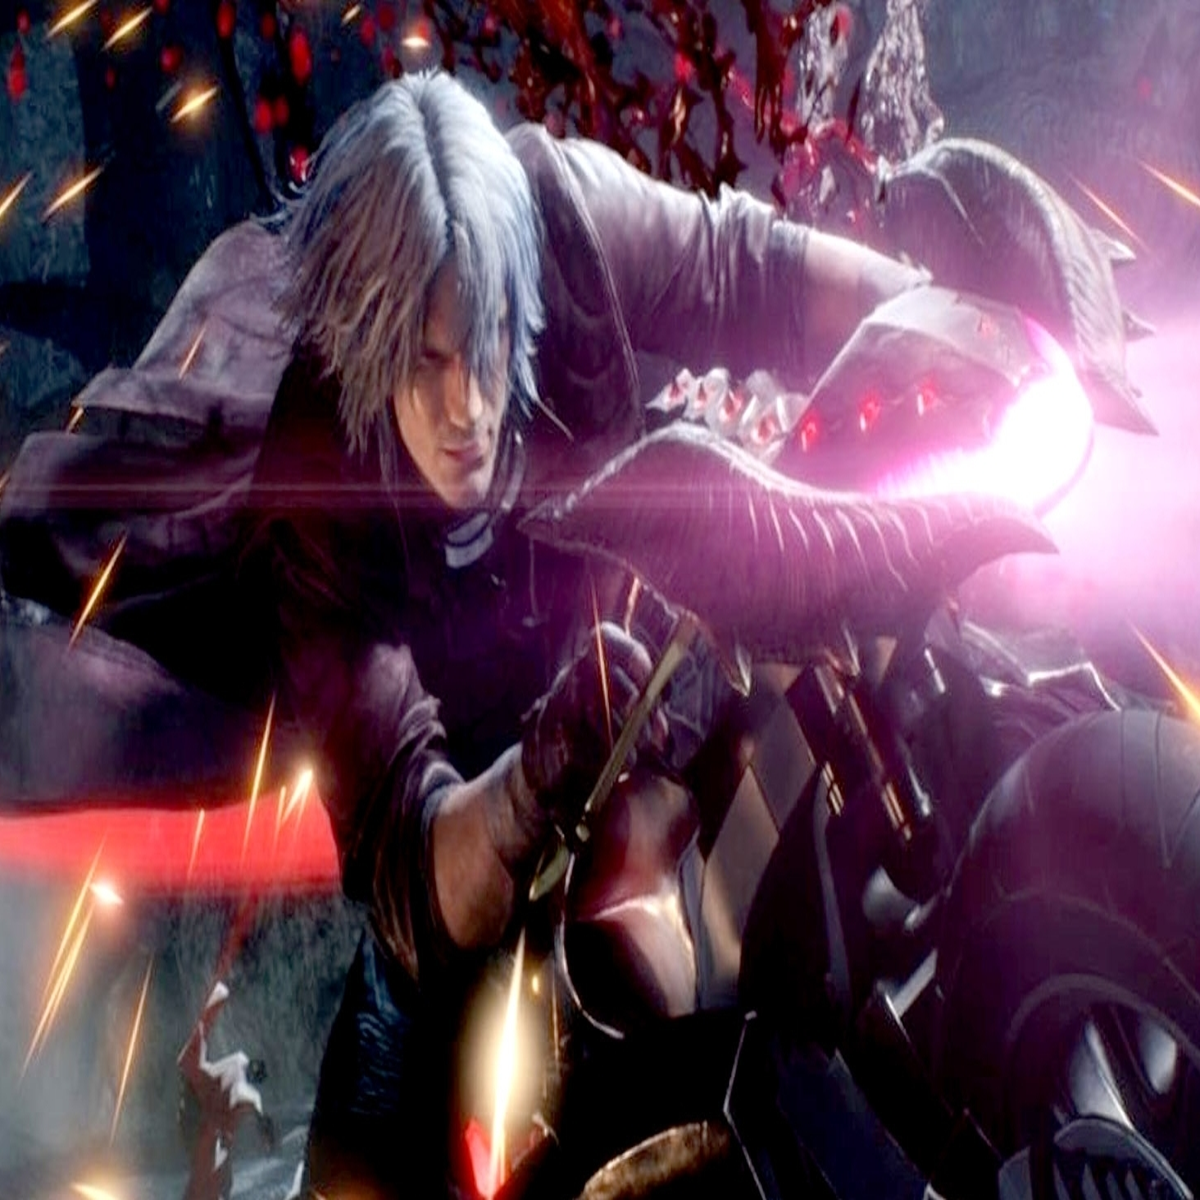 Steam Community :: Screenshot :: Devil May Cry 4: Special Edition